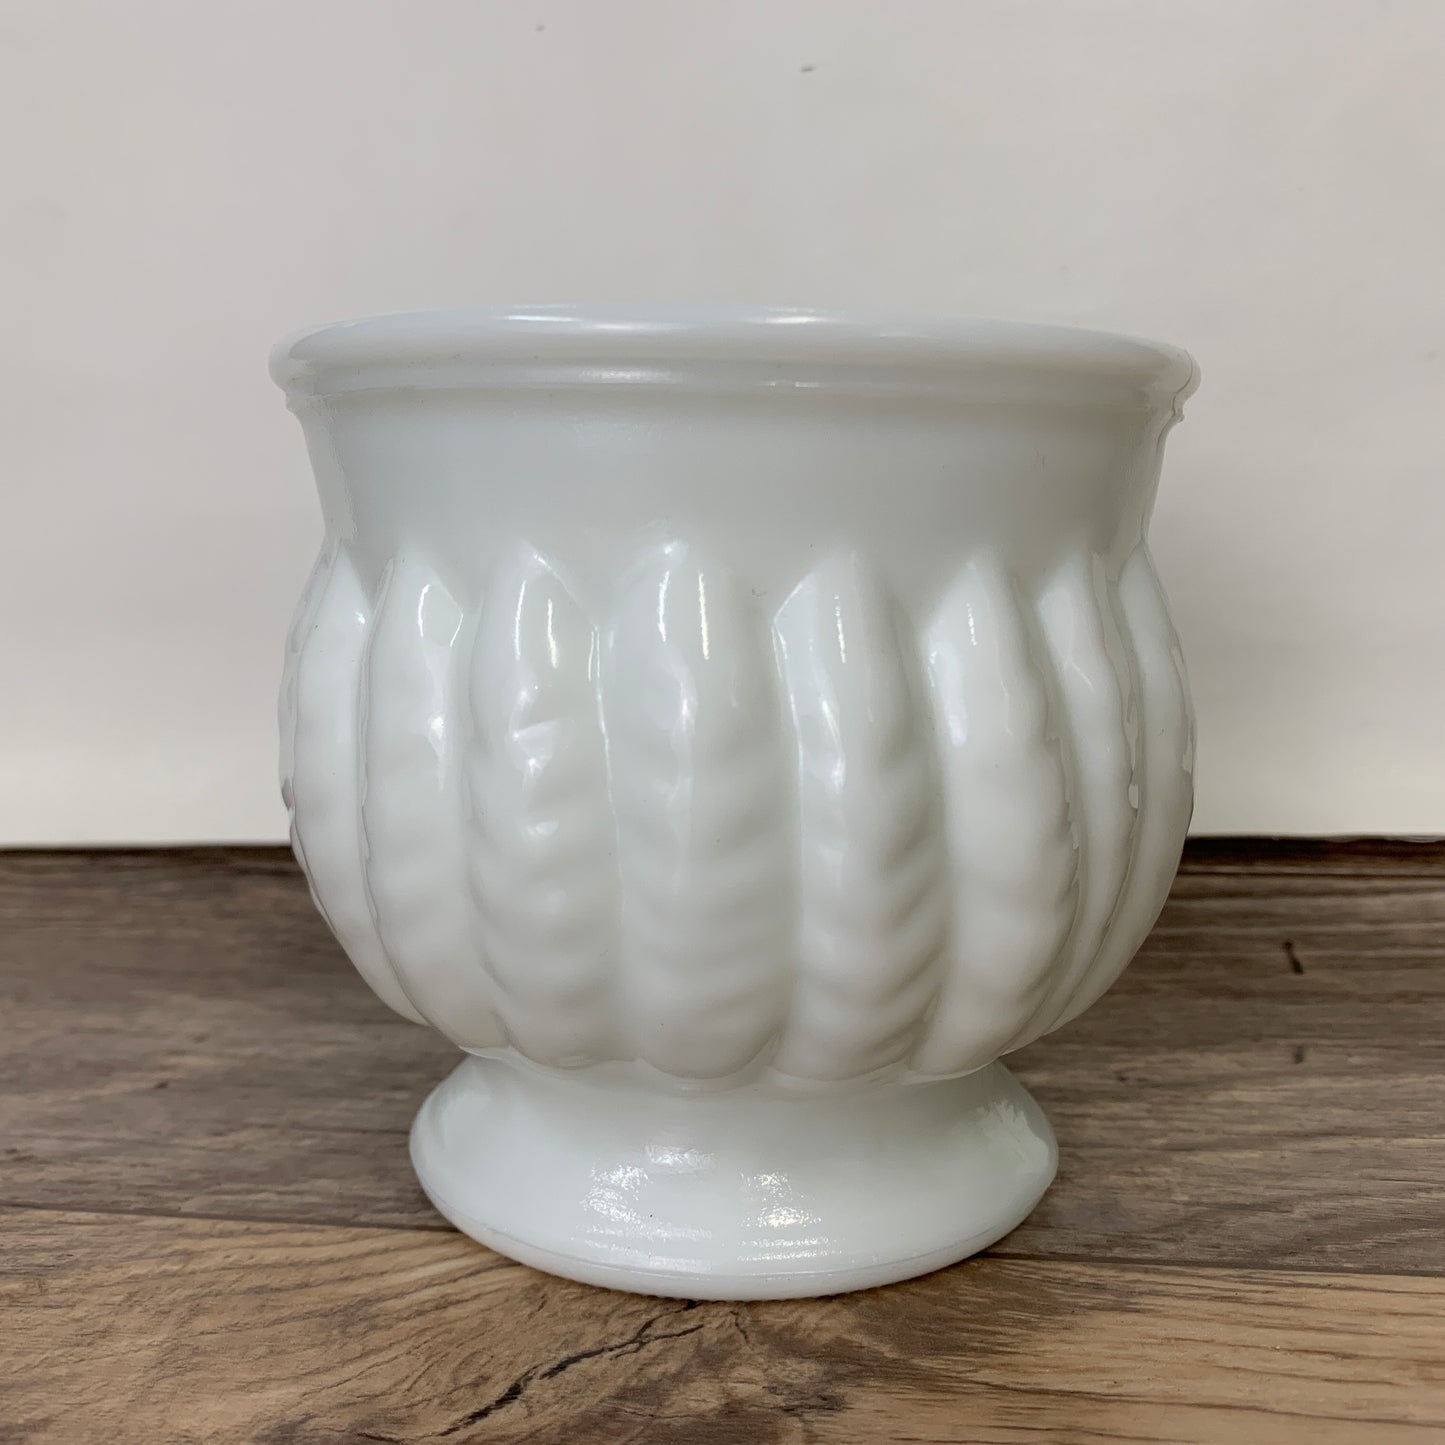 Small Milk Glass Planter, Randall Milk Glass Planter with Feather Pattern